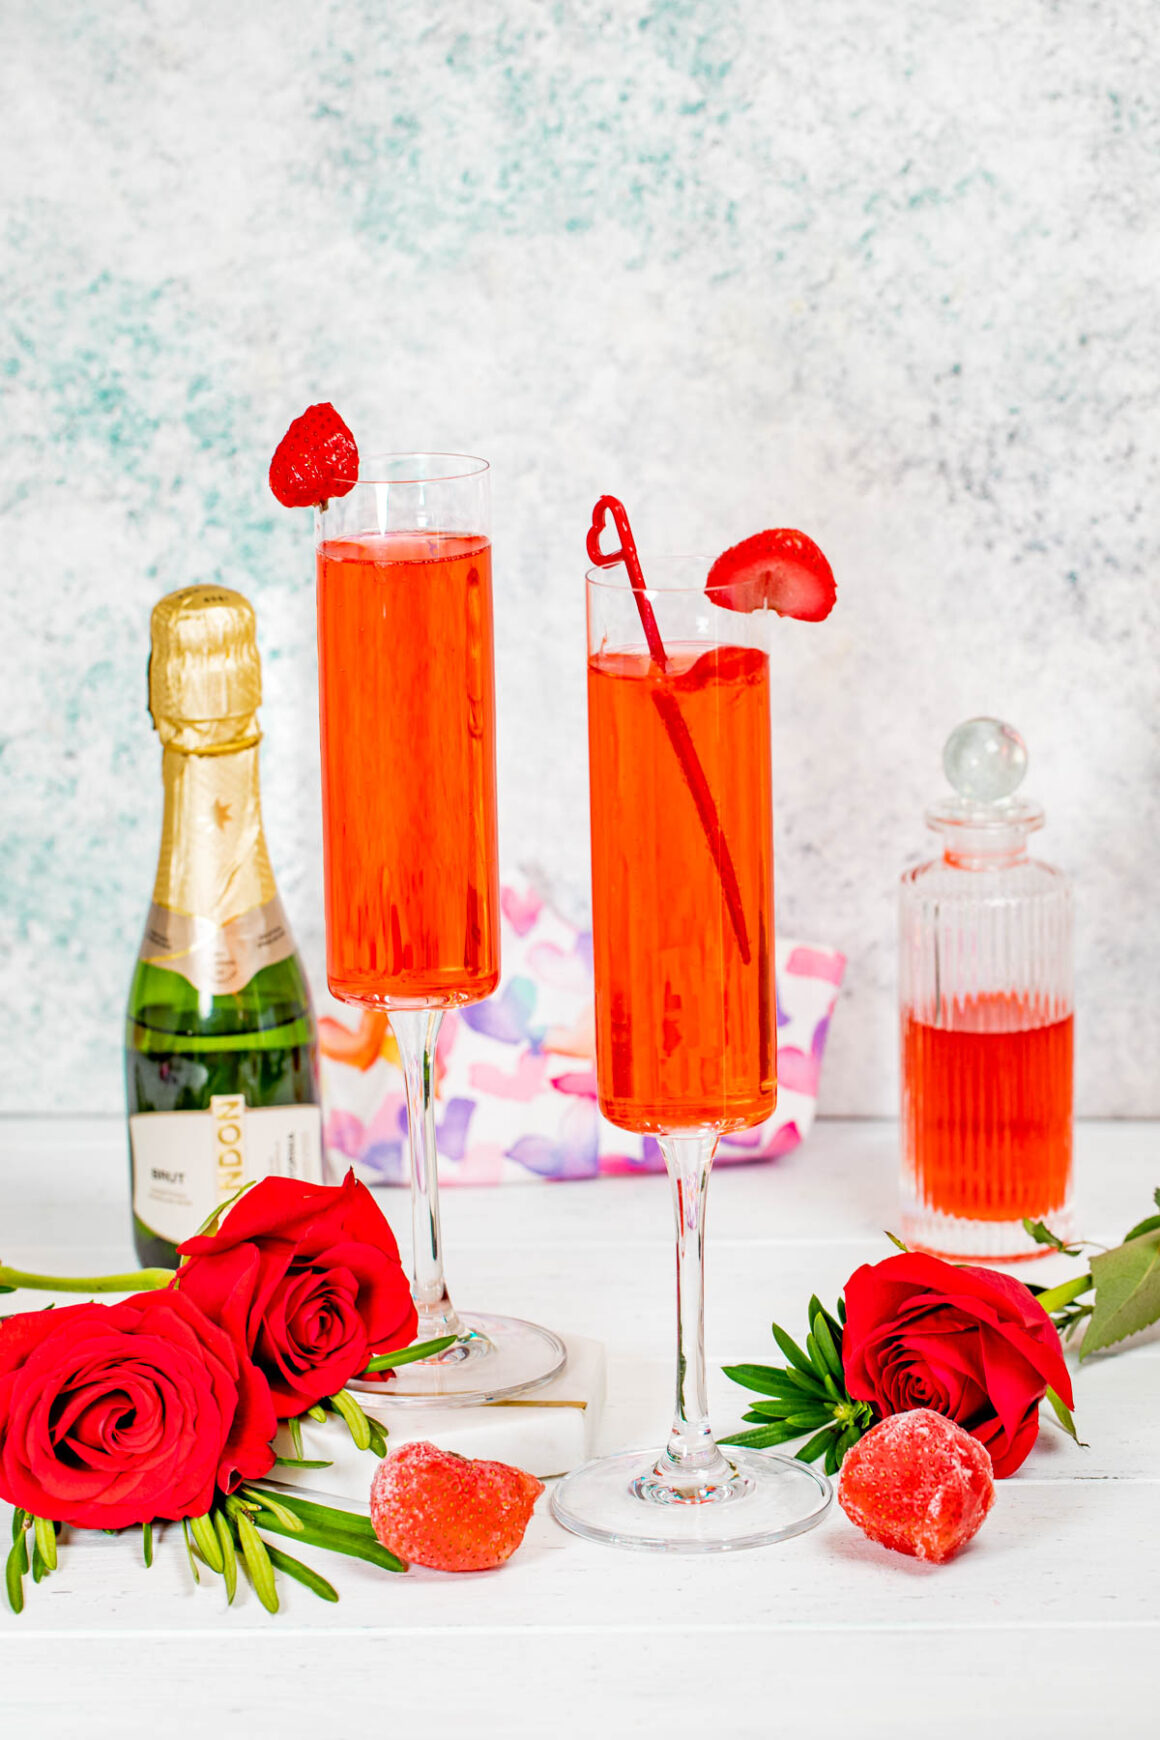 strawberry crush cocktail served into a champagne glasses